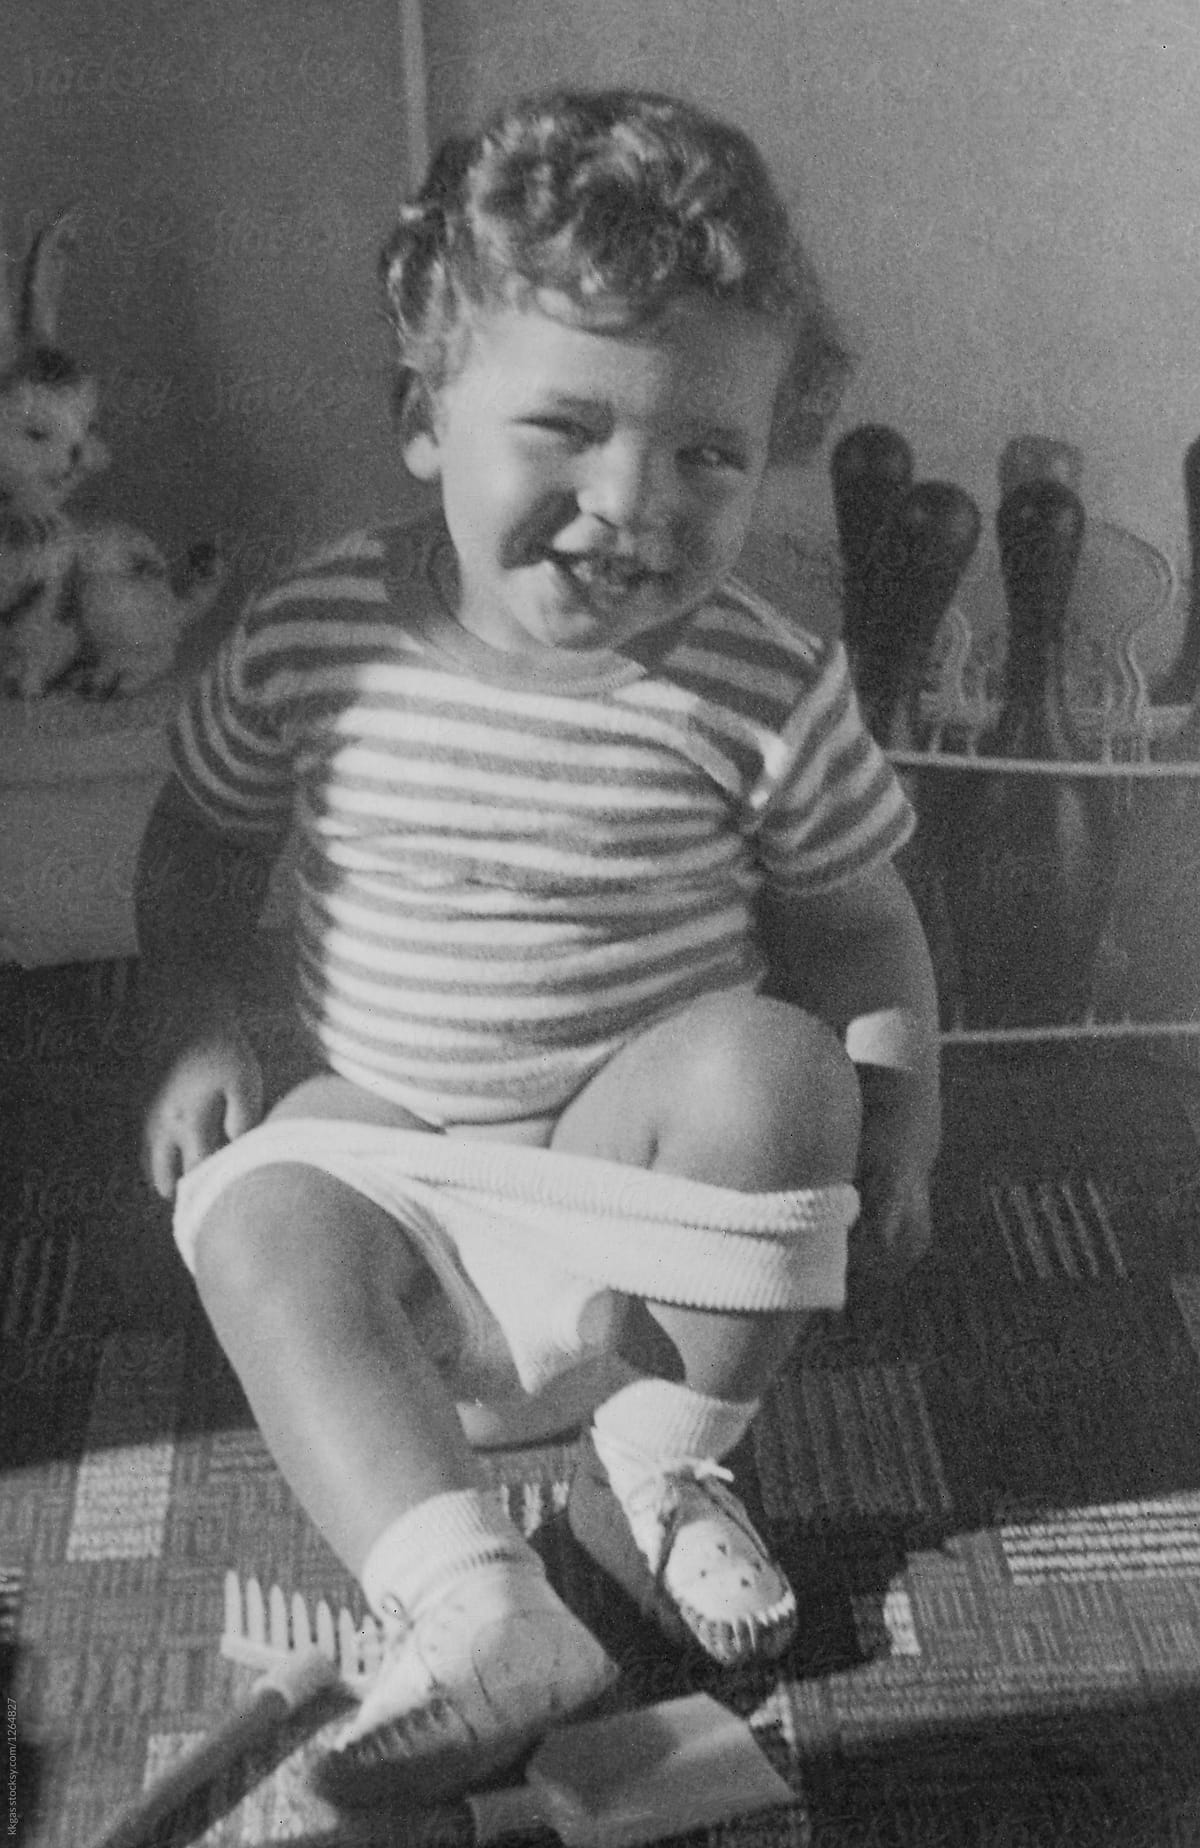 Scanned vintage photo of small child sitting on a potty